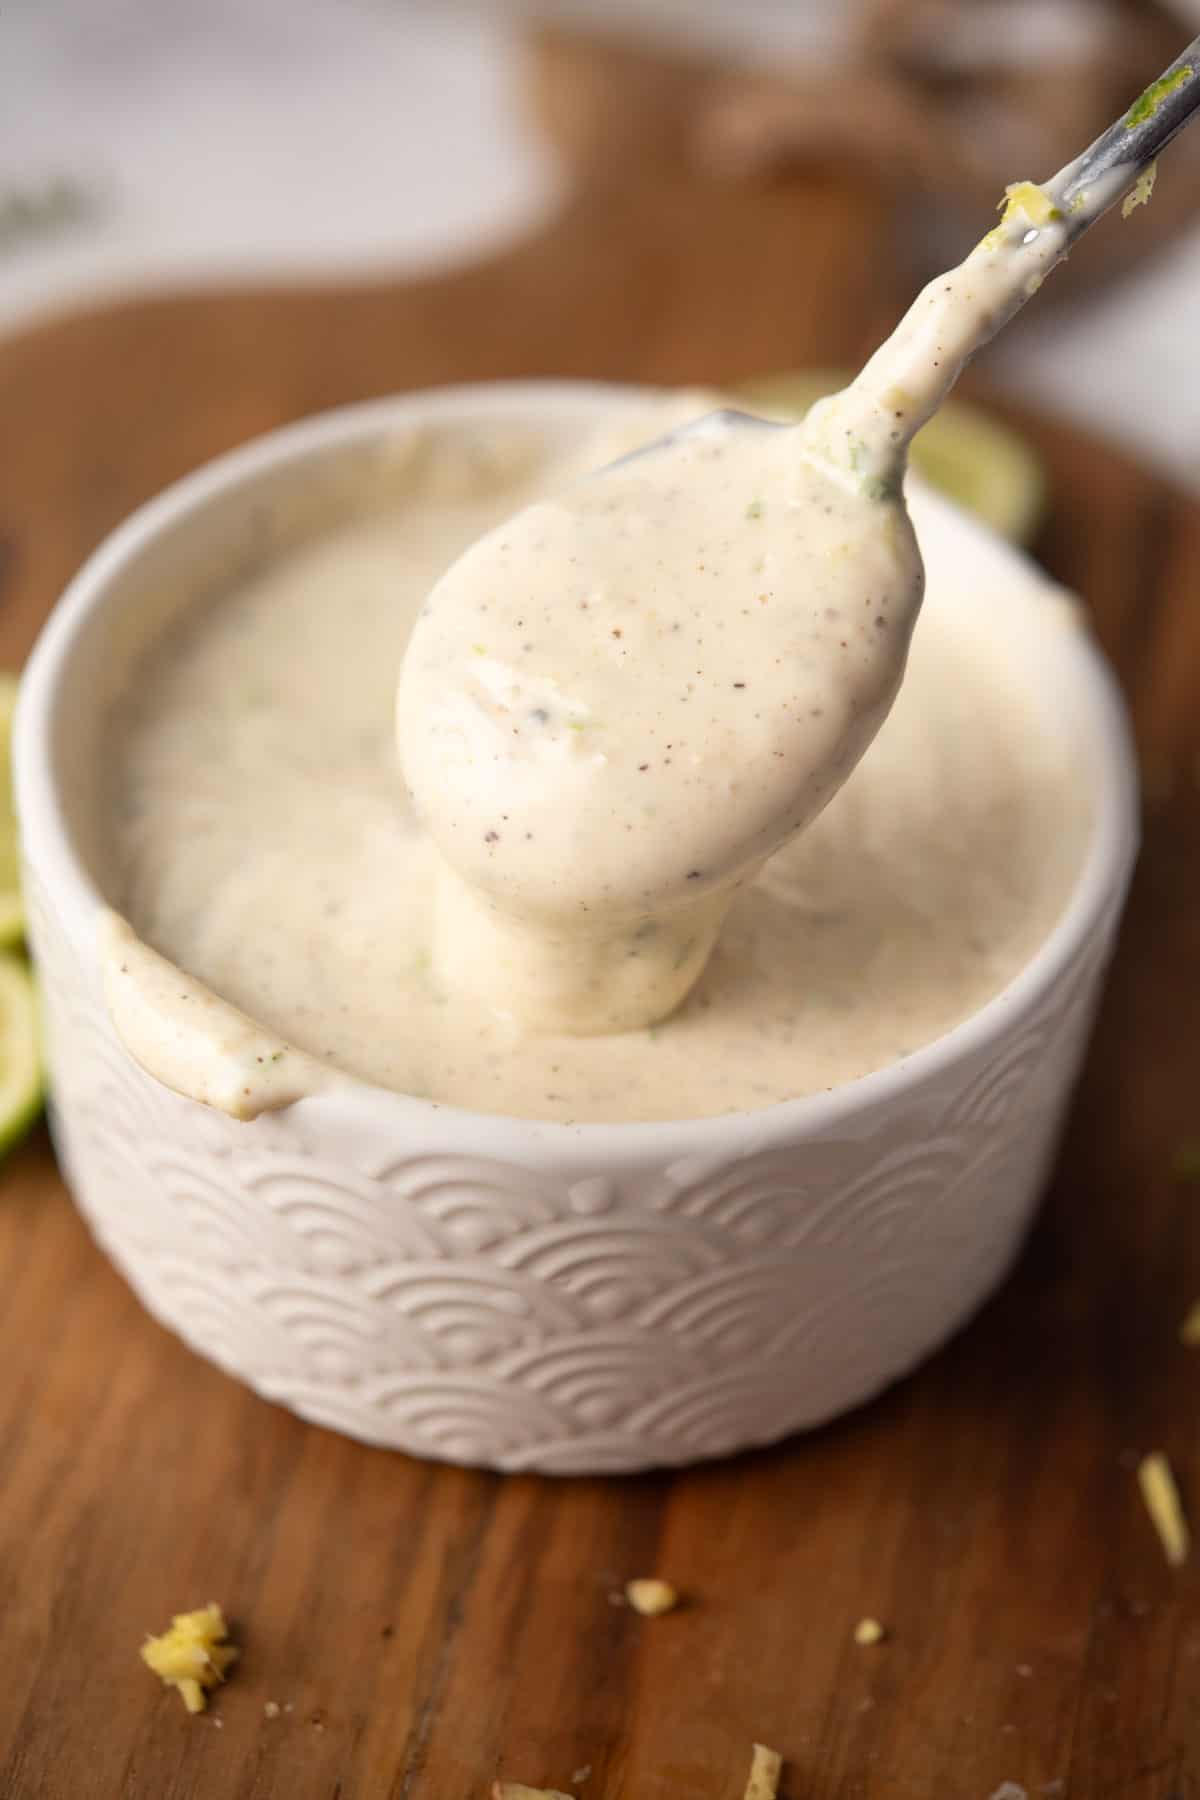 creamy and delicious ginger lime aioli sauce dripping in a spoon.